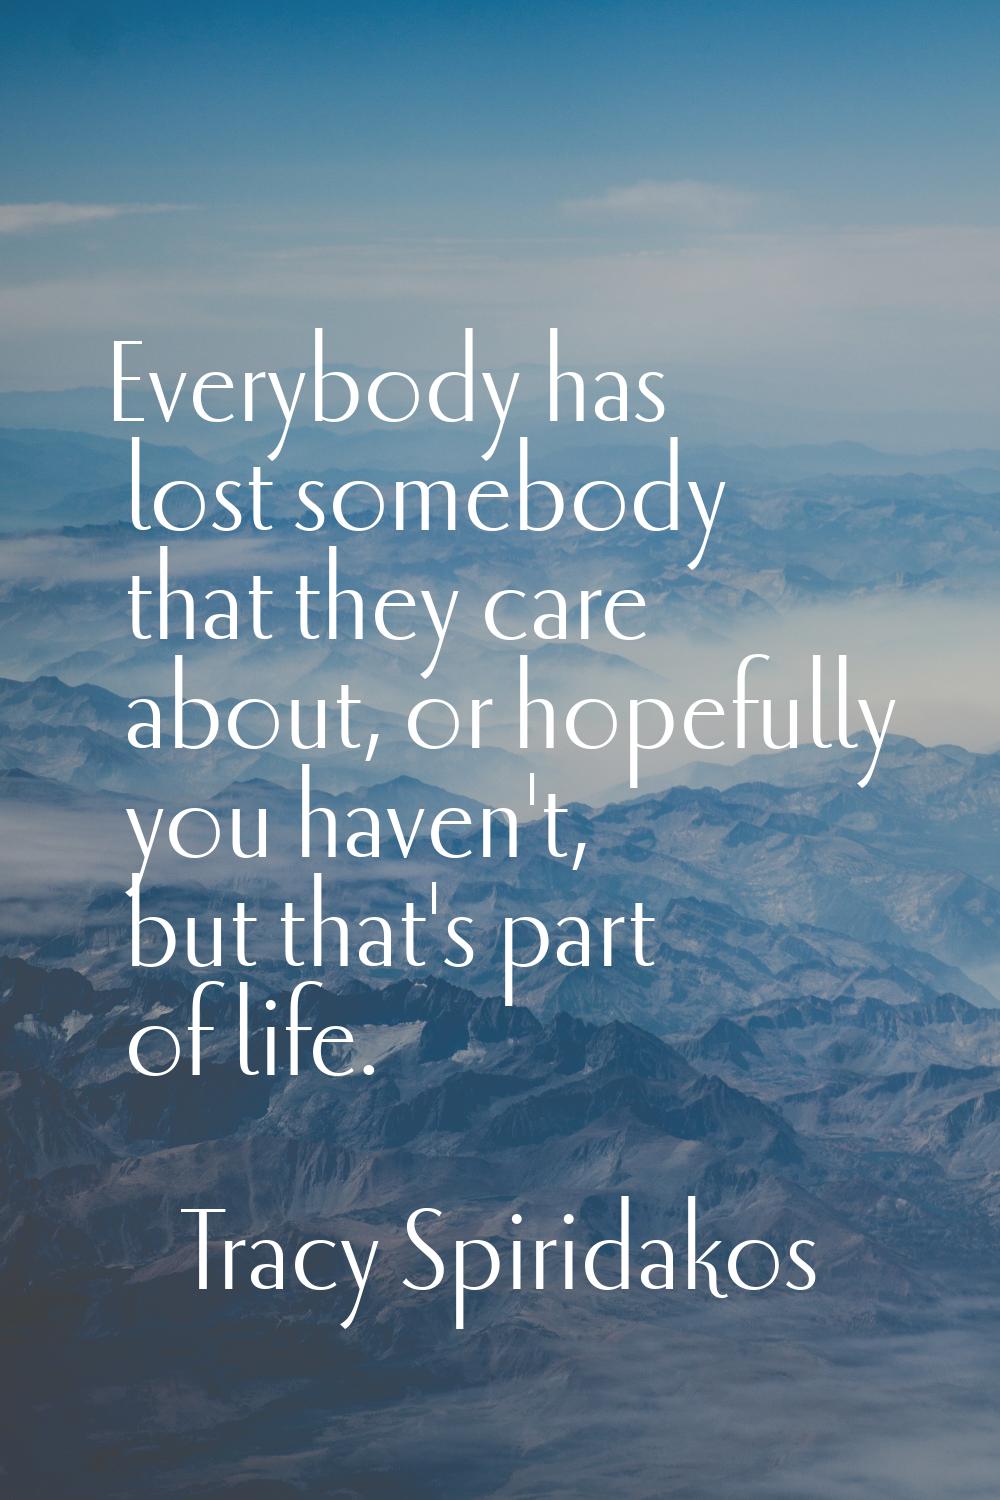 Everybody has lost somebody that they care about, or hopefully you haven't, but that's part of life